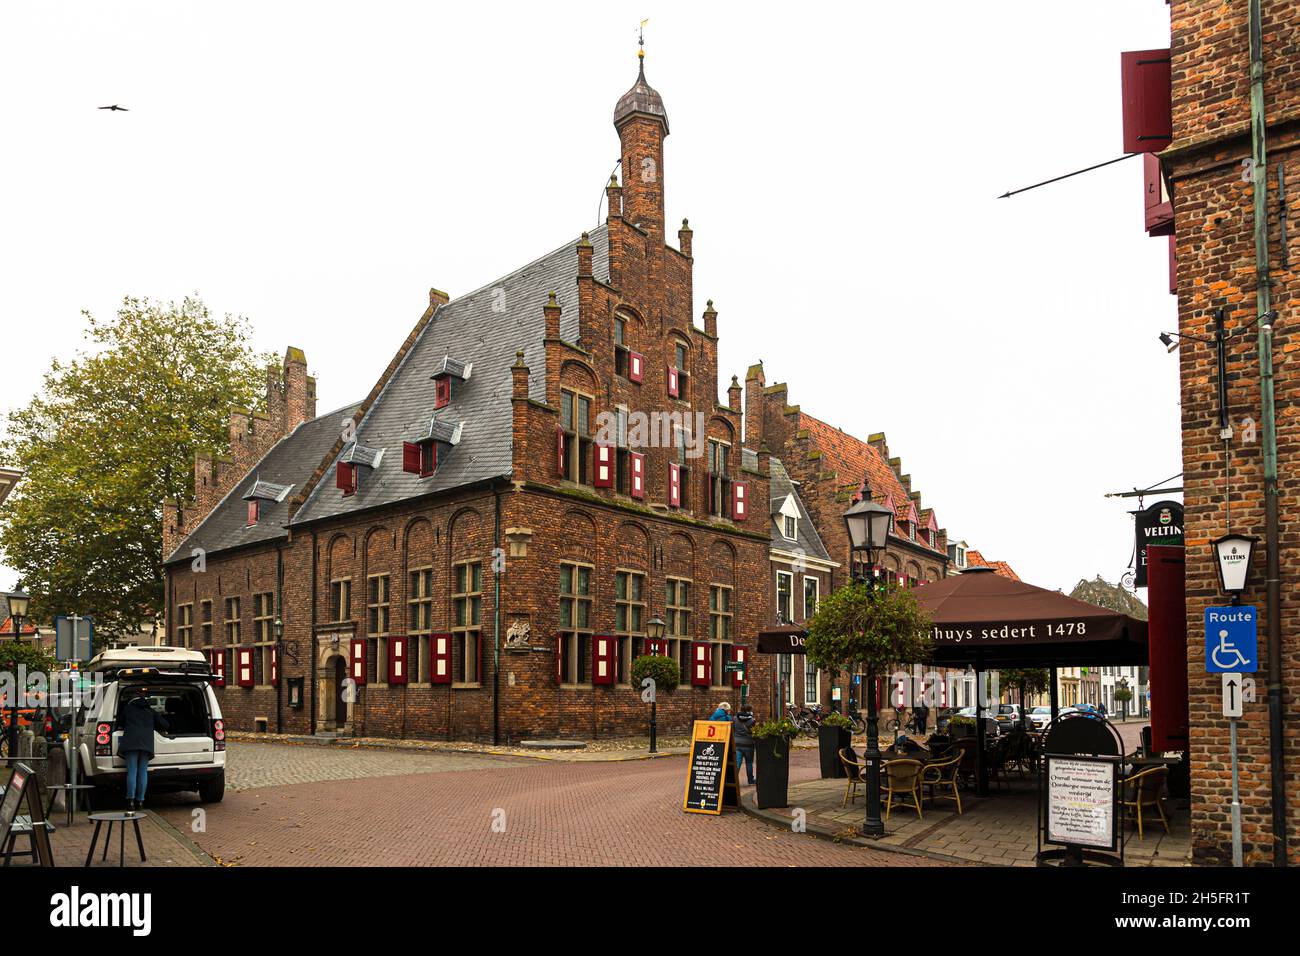 Hanseatic splendor also in Doesburg. Town Hall of the Hanseatic city of Doesburg, Netherlands. On the right, the outdoor terrace of the oldest inn in the Netherlands, the Stadsbierhuis from 1478 Stock Photo